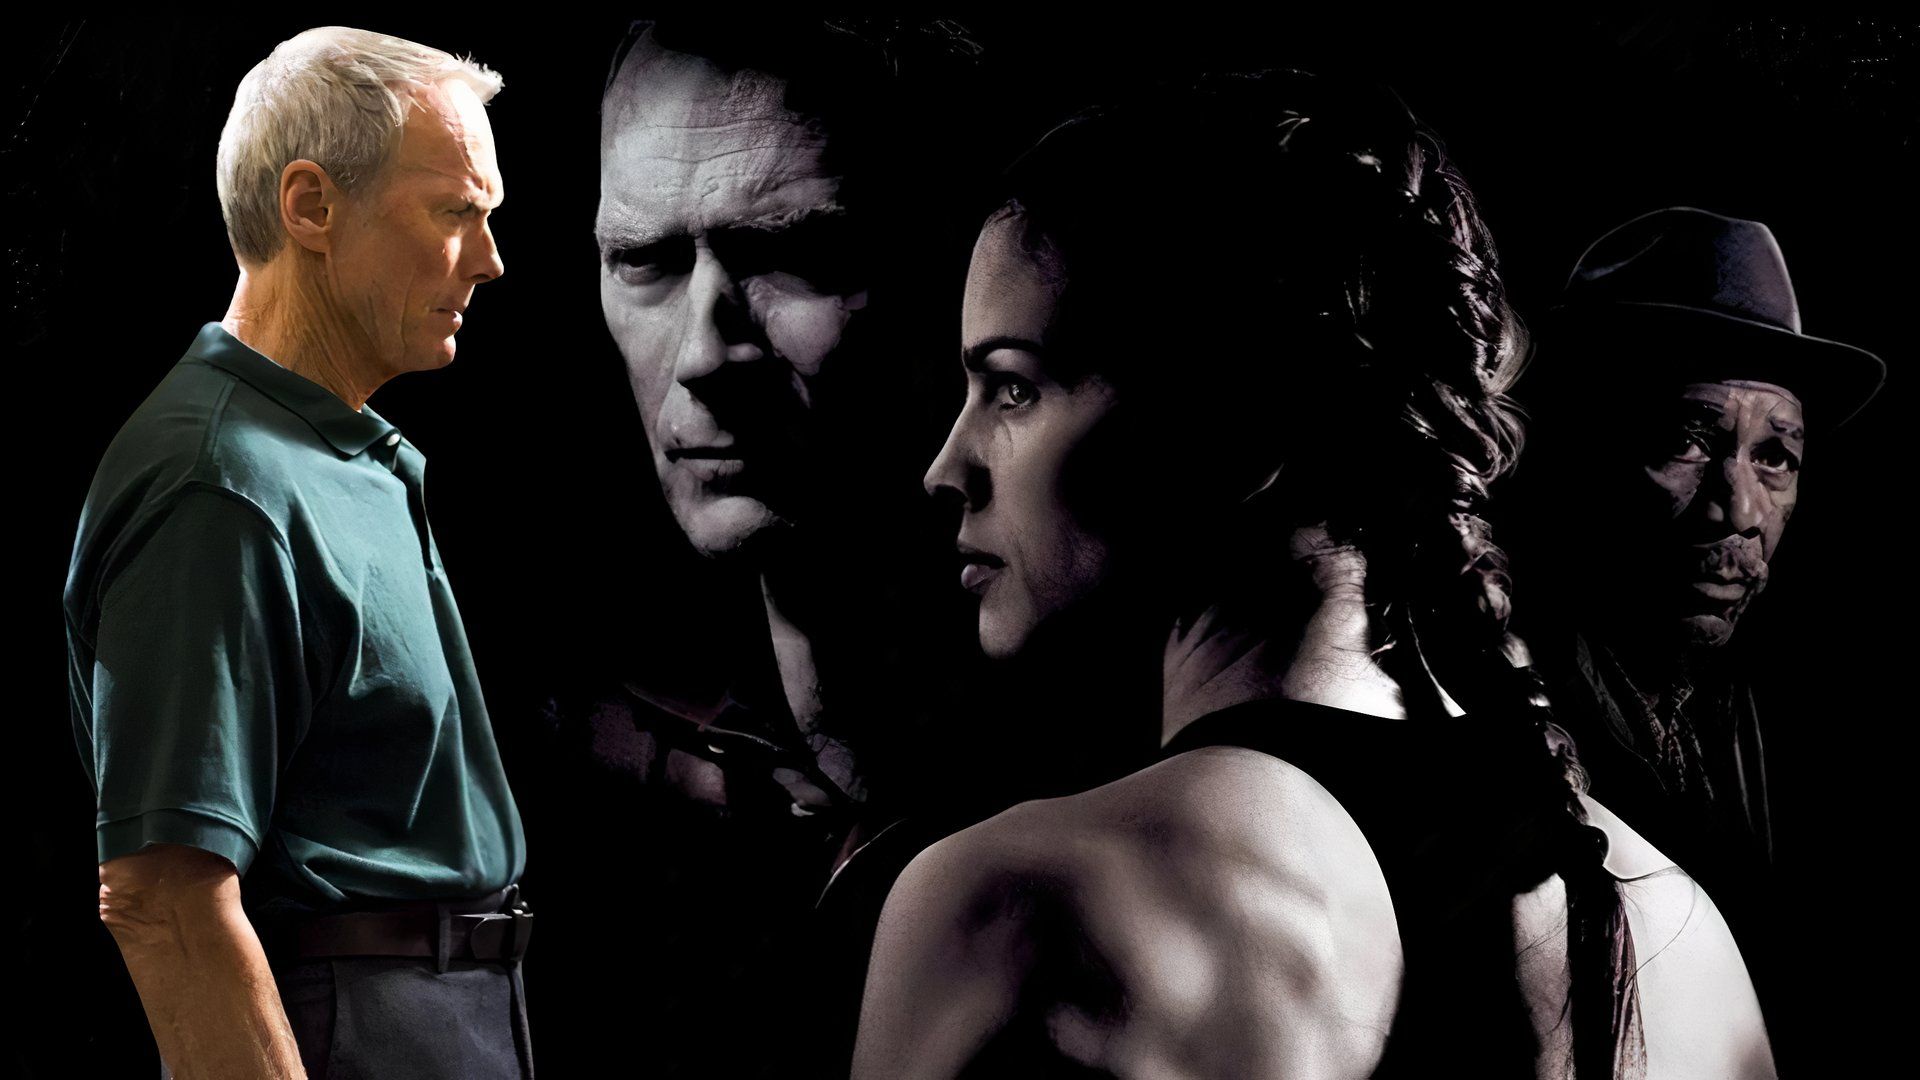 An edited image of Clint Eastwood and Hilary Swank alongside Morgan Freeman in Million Dollar Baby